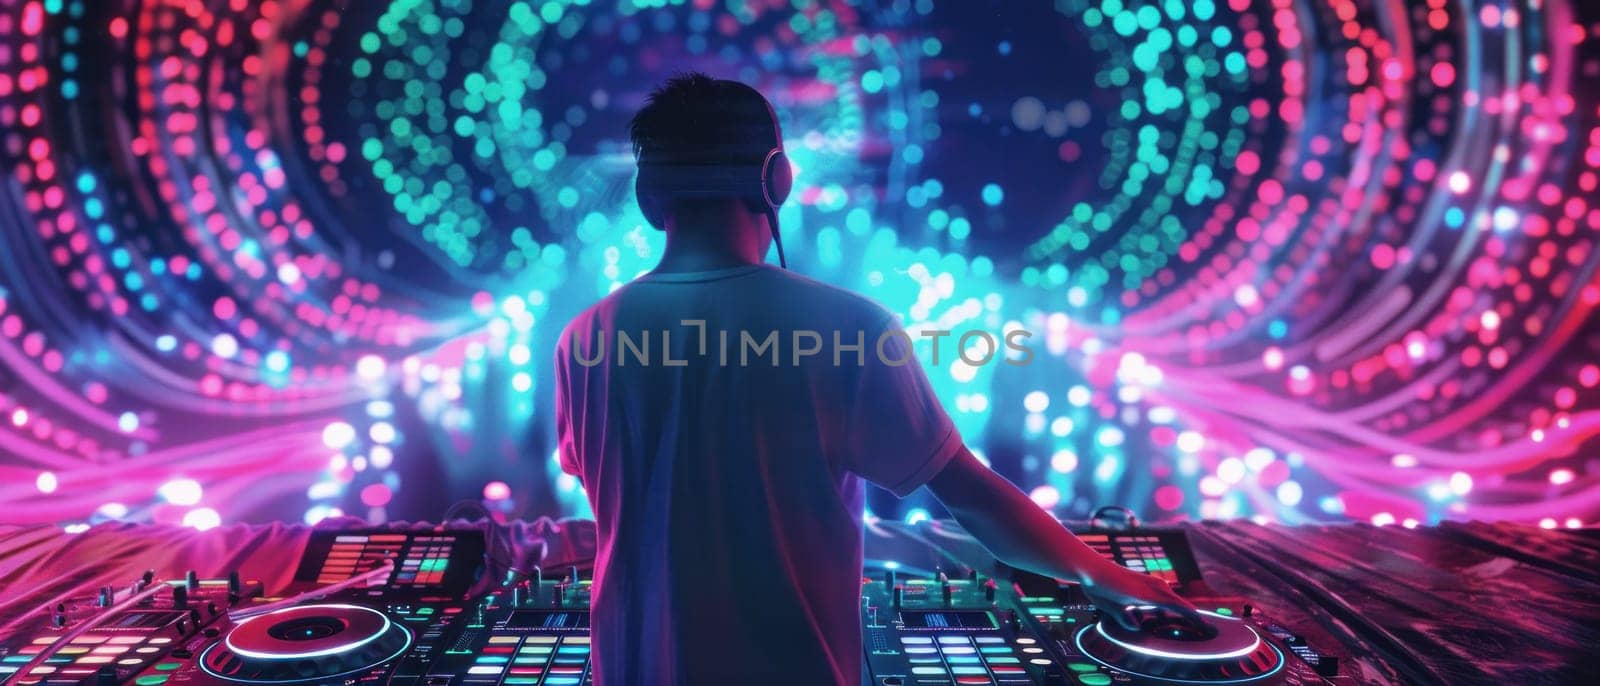 A man is playing a DJ set in front of a colorful light show.